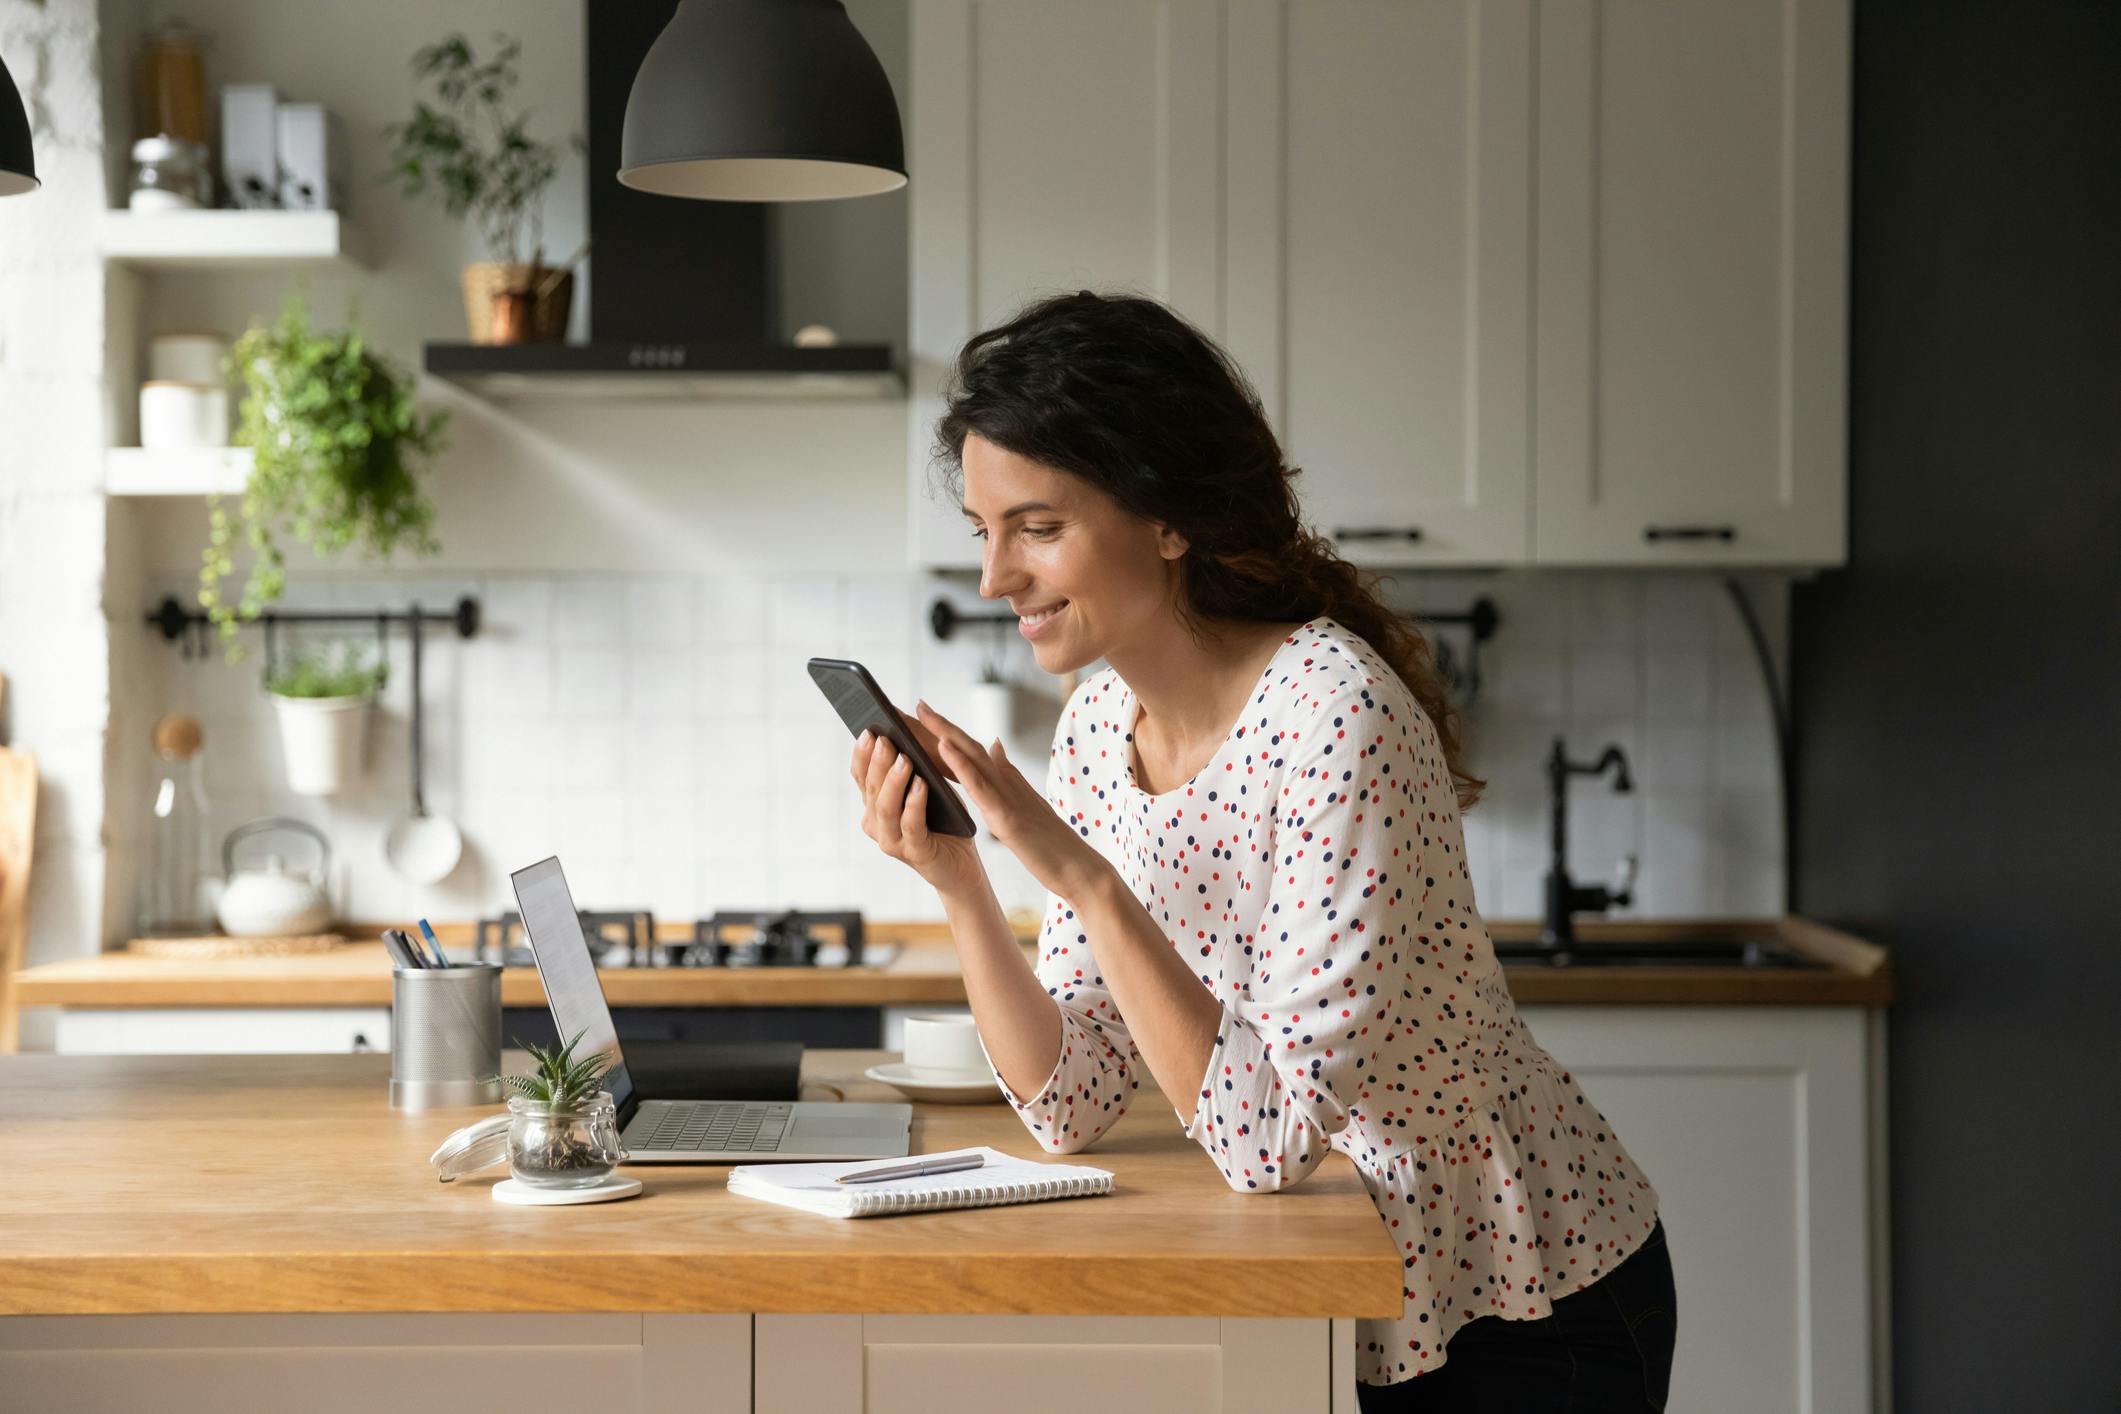 A woman stands in a kitchen reading from her phone.